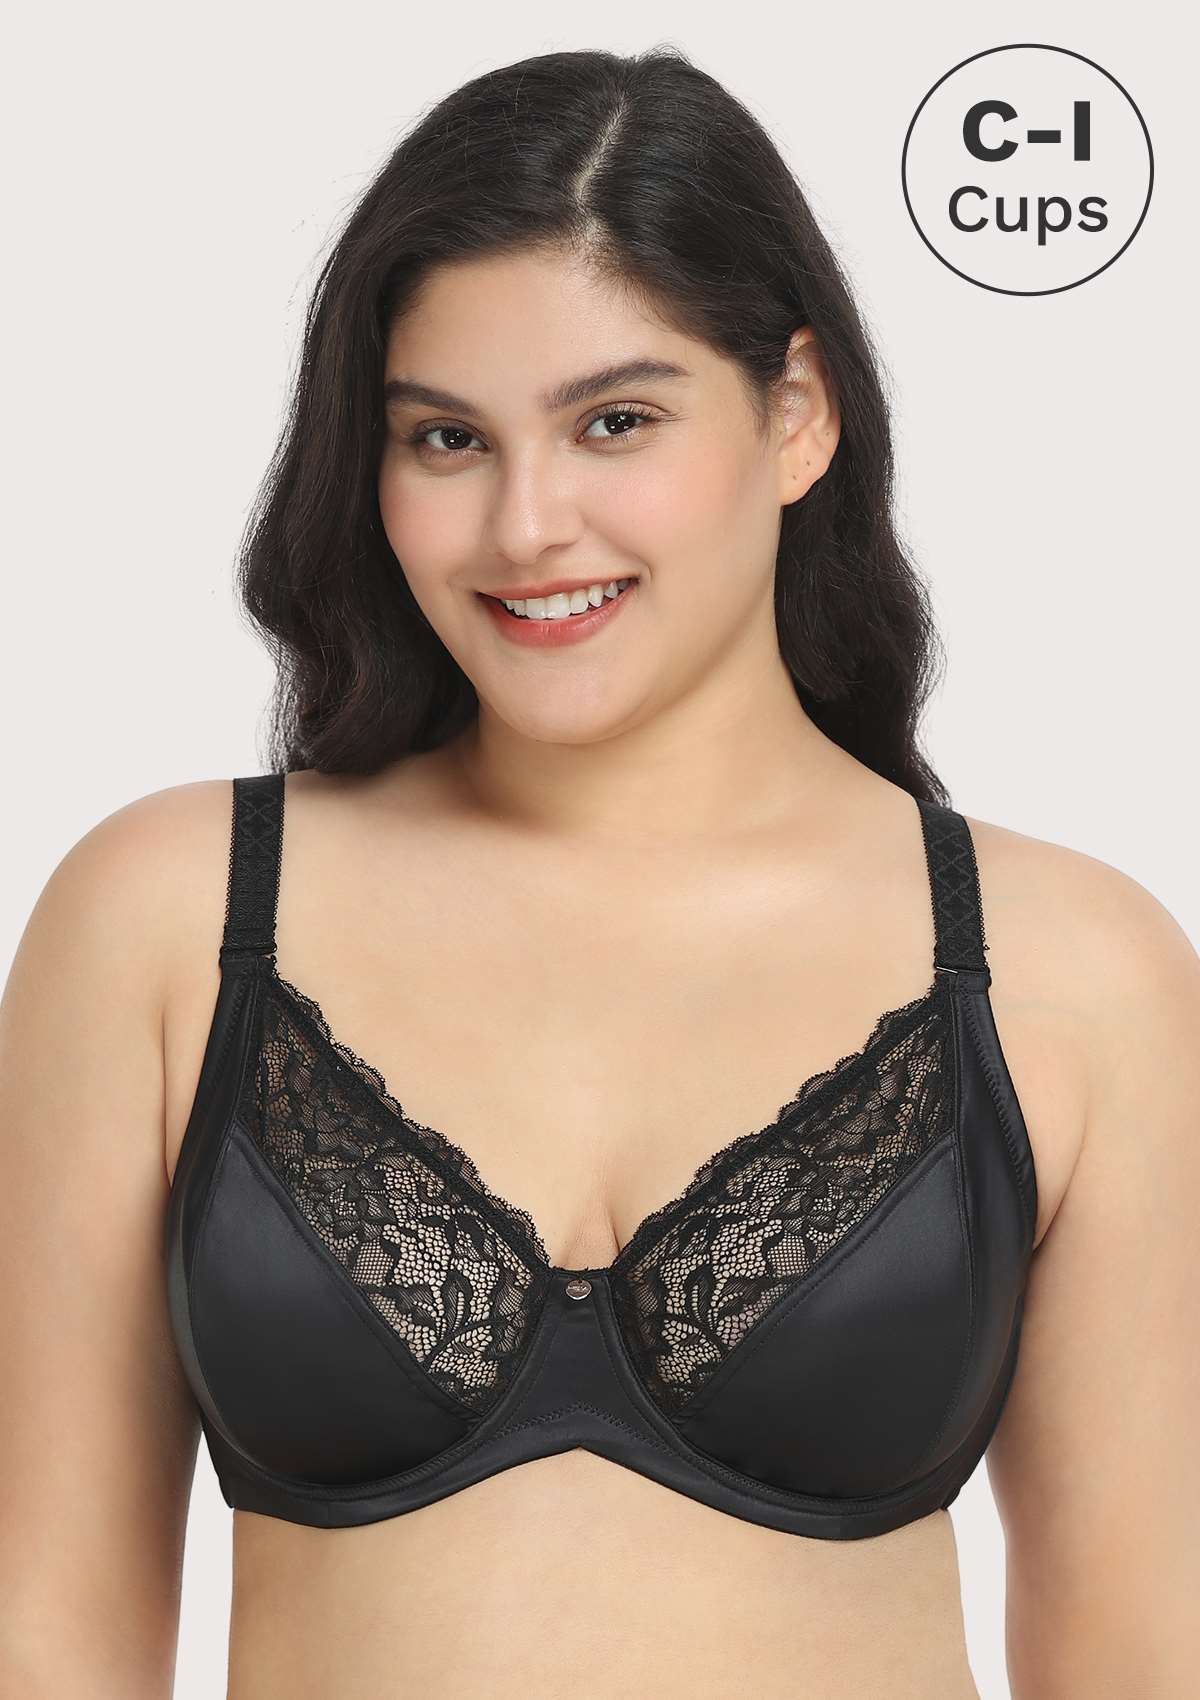 HSIA Foxy Satin Silky Full Coverage Underwire Bra With Floral Lace Trim - Black / 42 / D